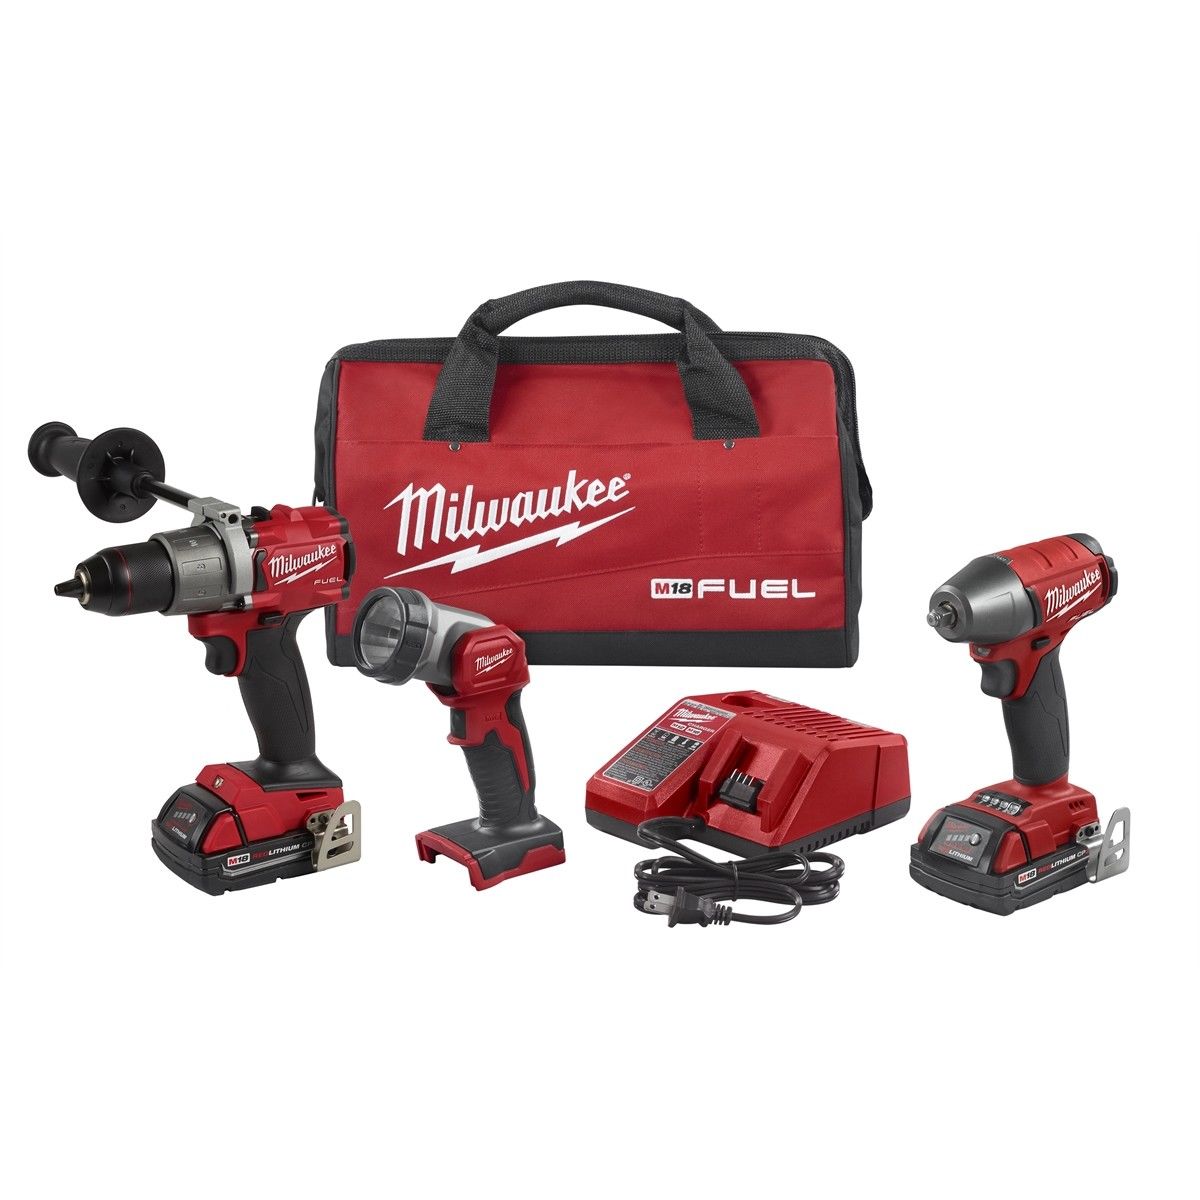 Mlw2991-23 3 Piece M18 Fuel Auto Drill Impact Wrench & Light Kit